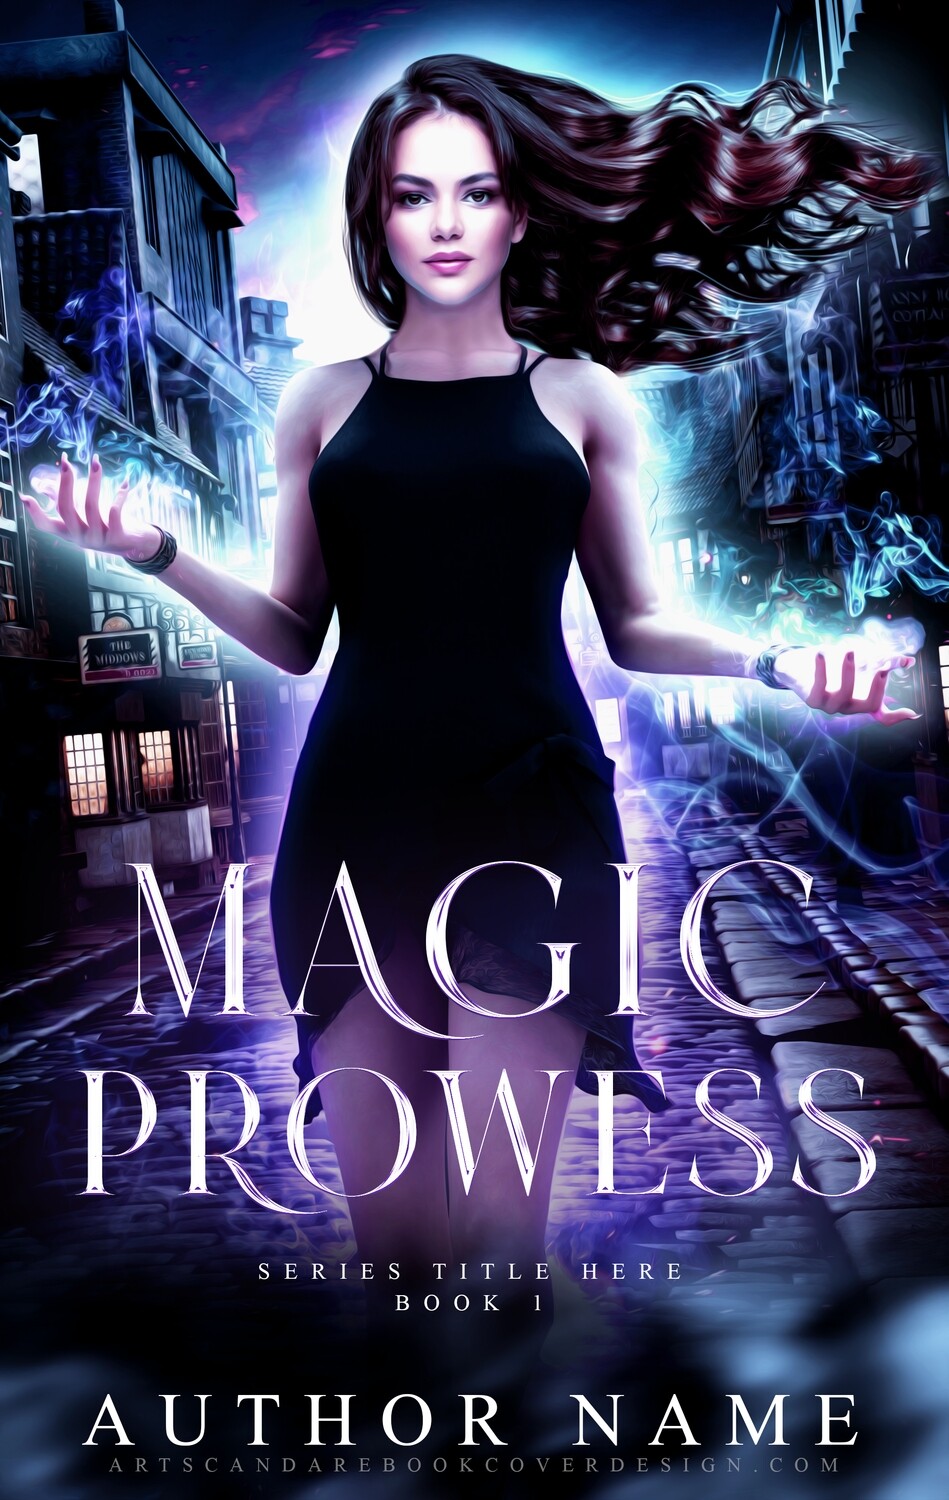 MAGIC PROWESS